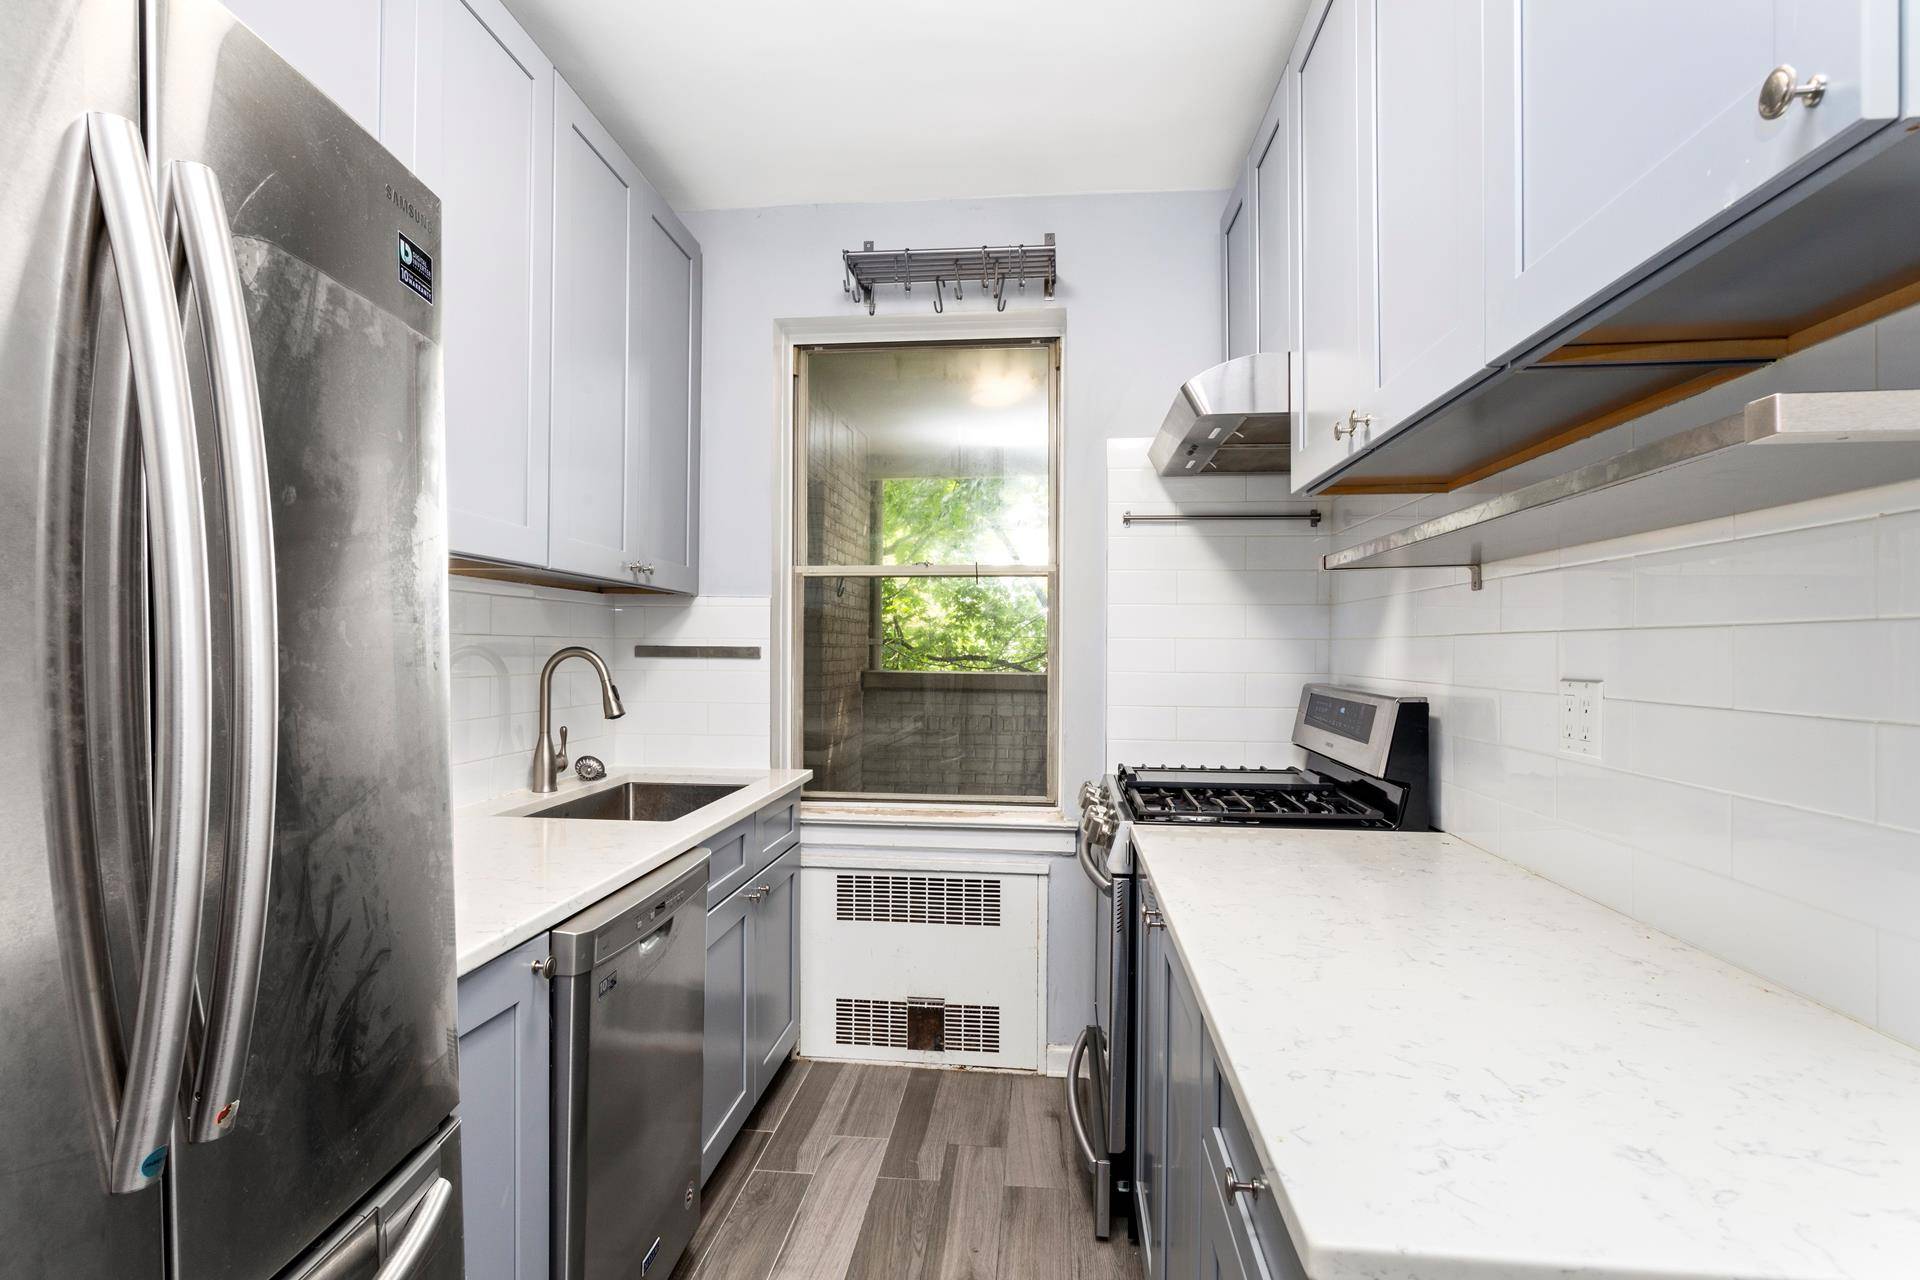 Live comfortably in Brooklyn's tranquil, desirable Midwood neighborhood, in a spacious, sunny 2 bedroom 1 bathroom apartment on a quiet cul de sac !